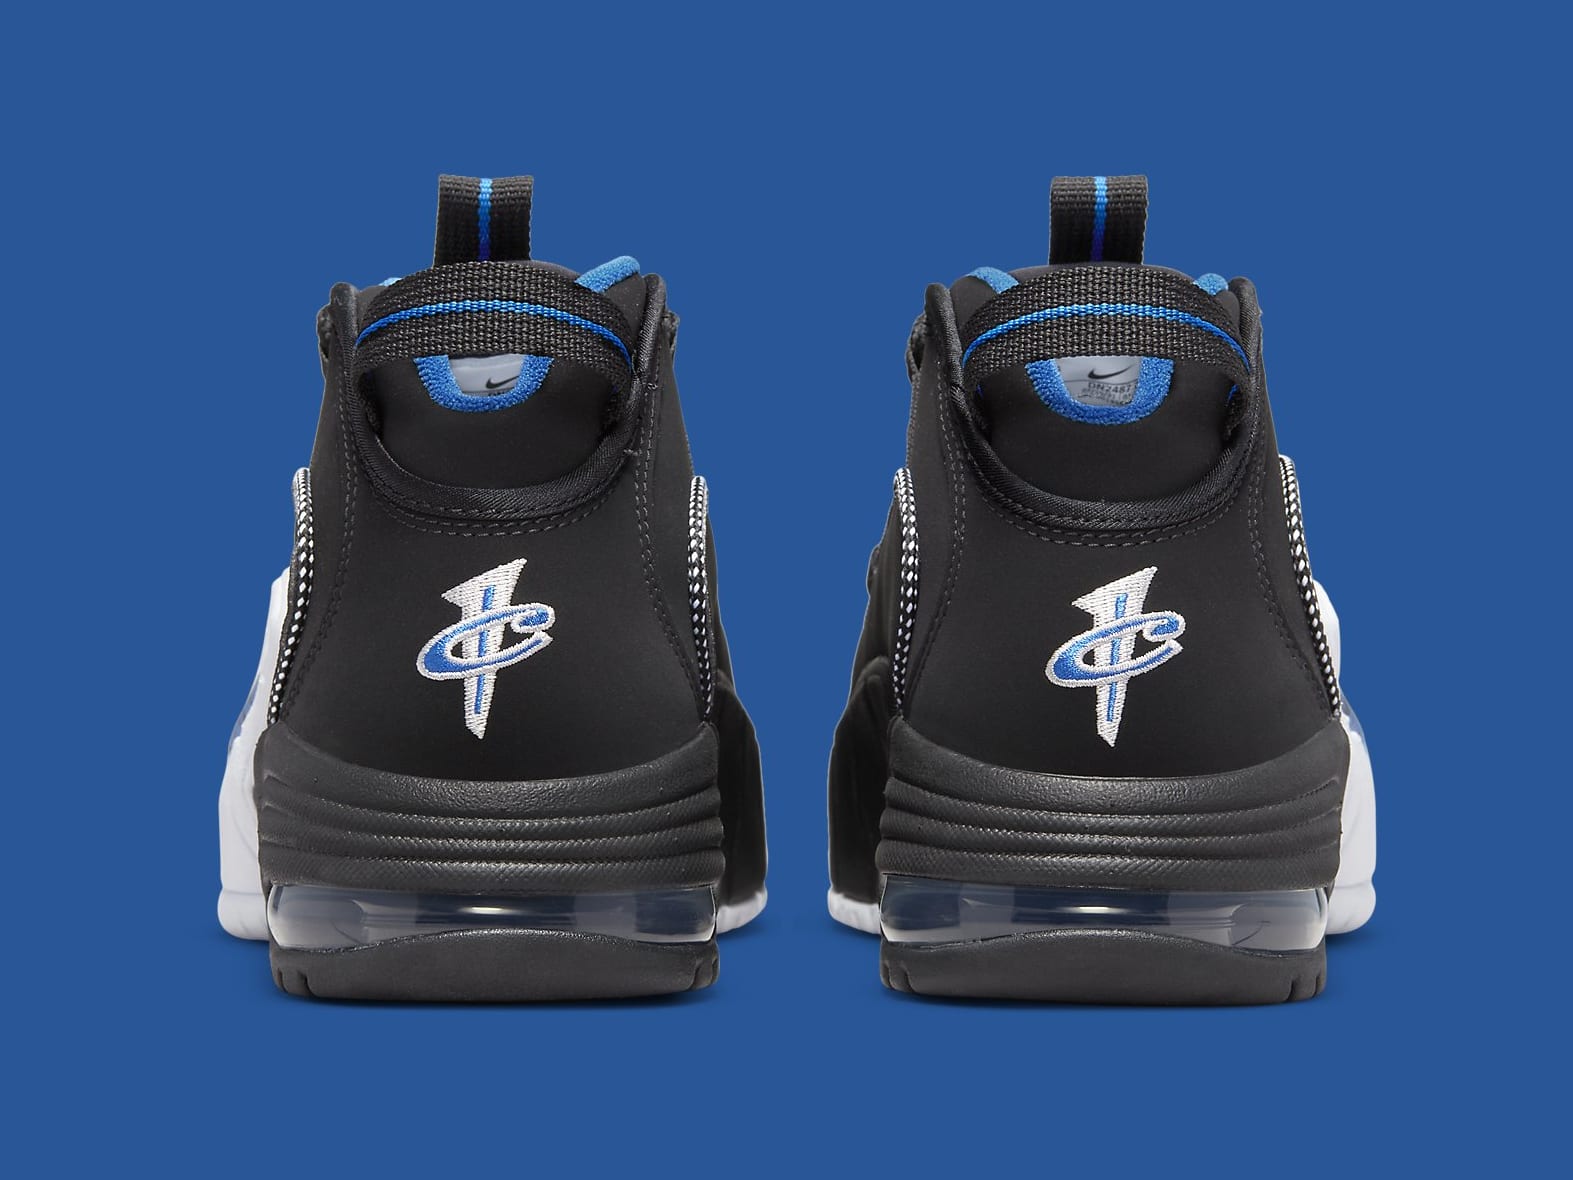 Nike Air Max Penny 1 Orlando Release Date Dn2487-001 Heel